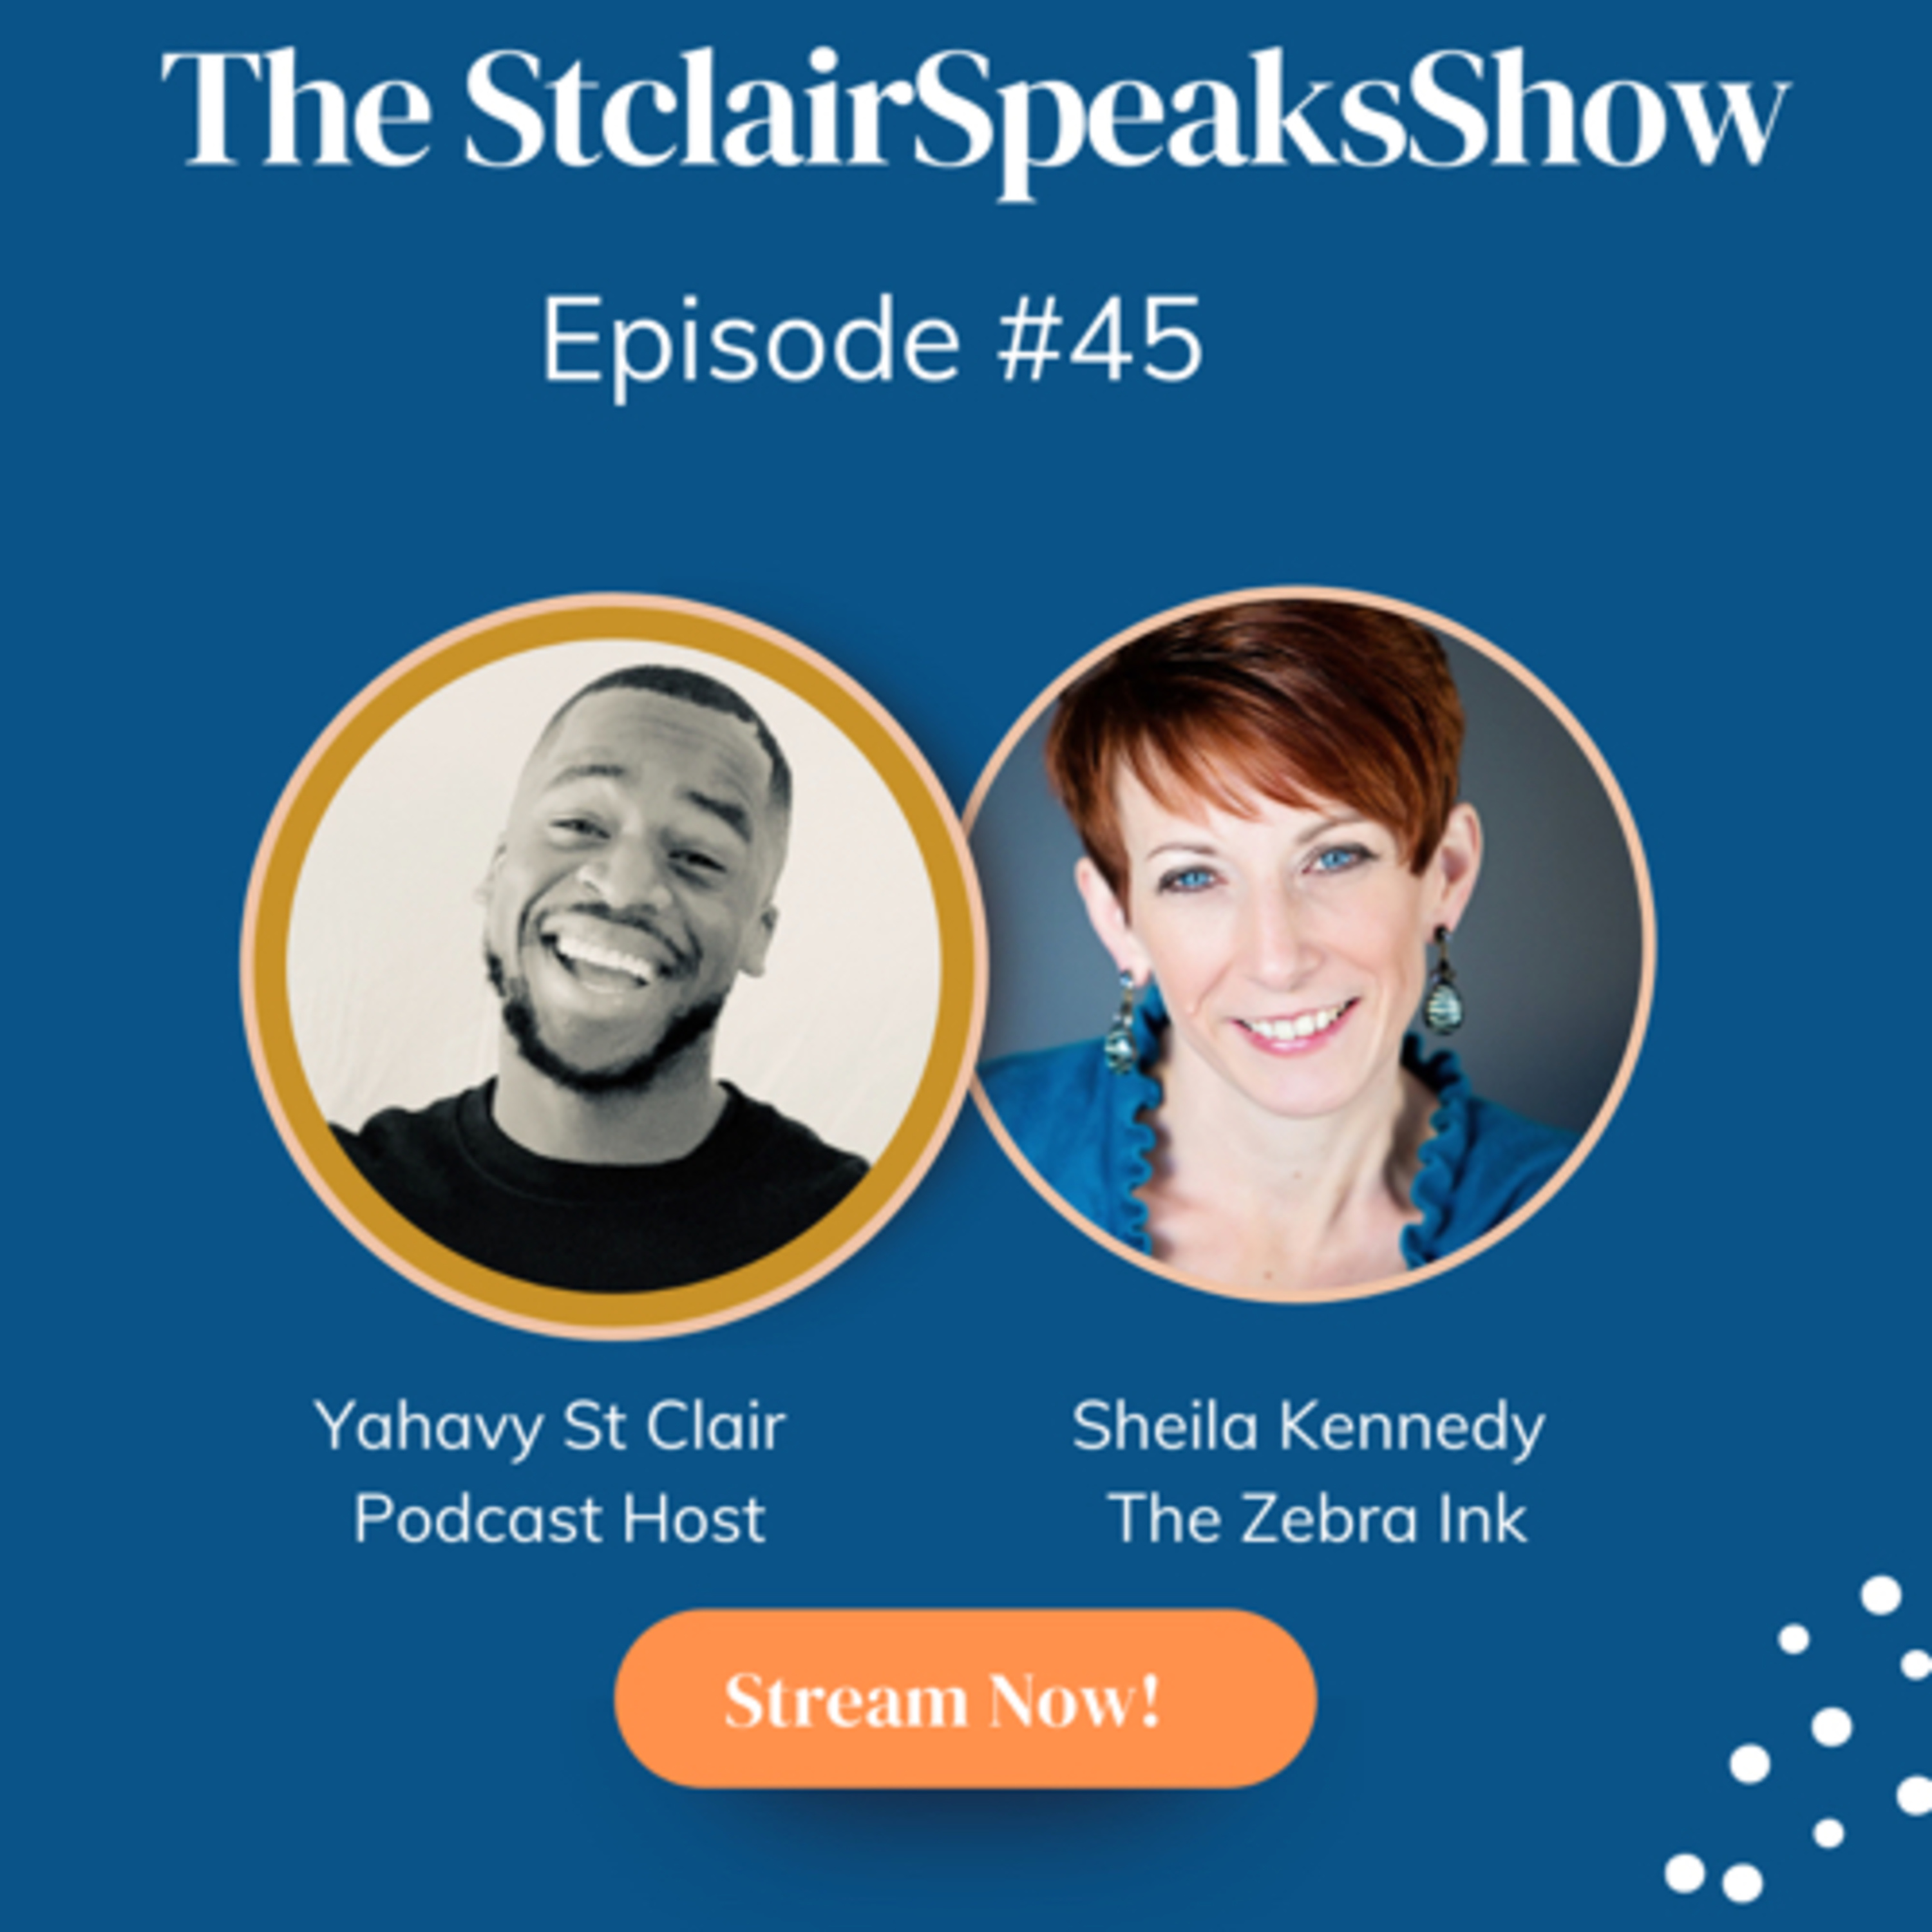 The StclairSpeaksShow Podcast Featuring Sheila Kennedy Author and Independent Publishing Strategist at The Zebra Ink Episode #45